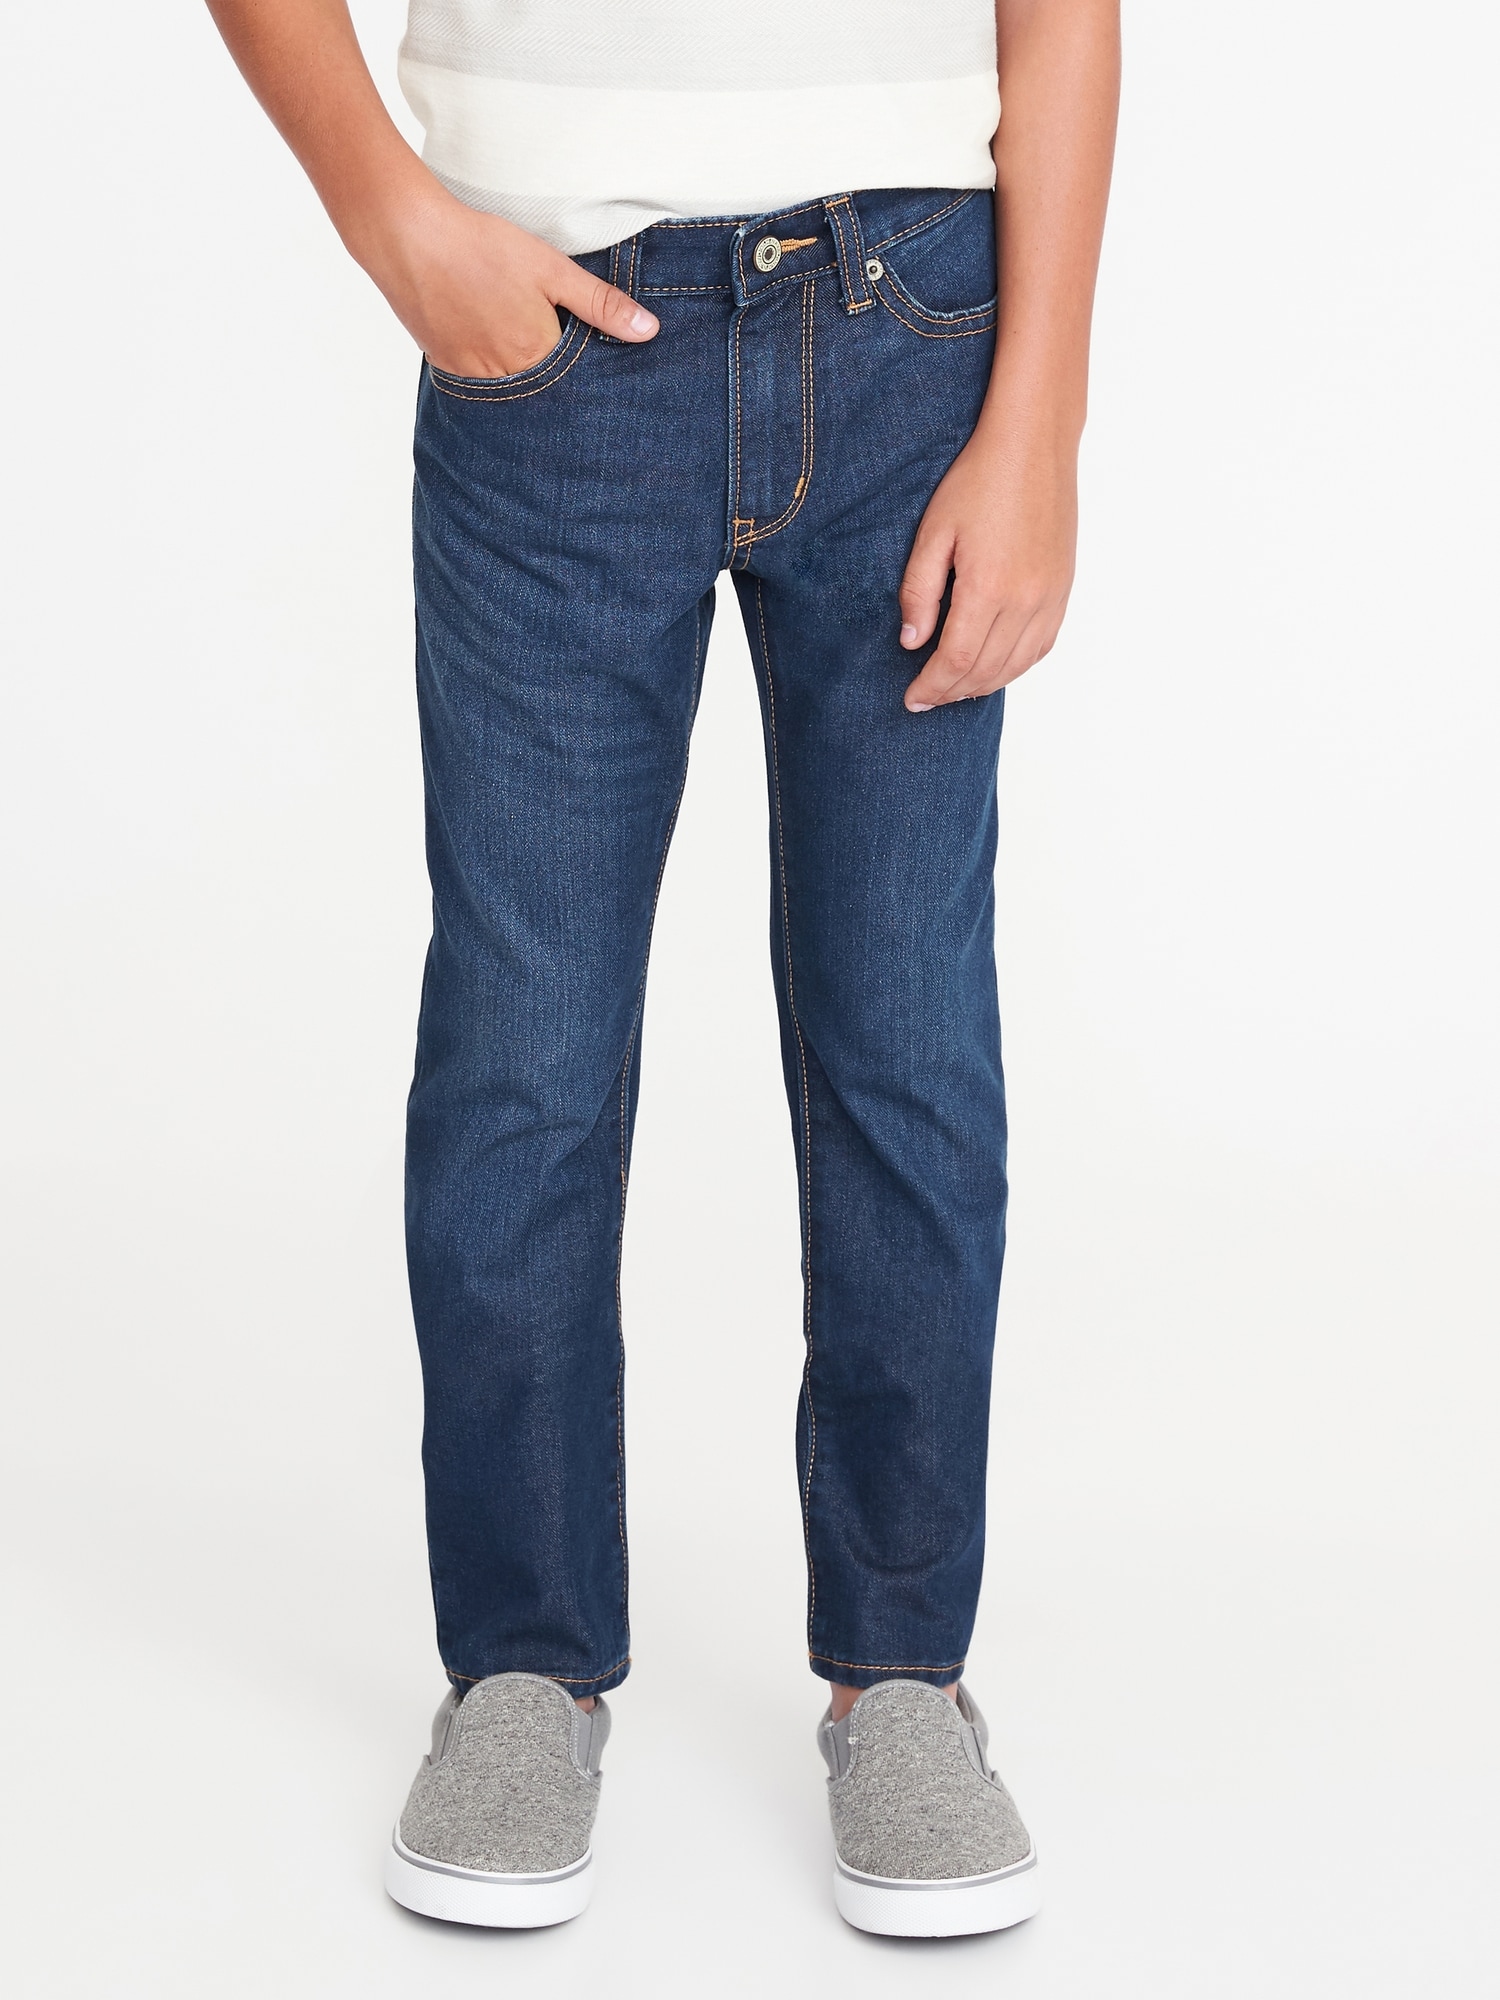 Skinny Non-Stretch Jeans for Boys